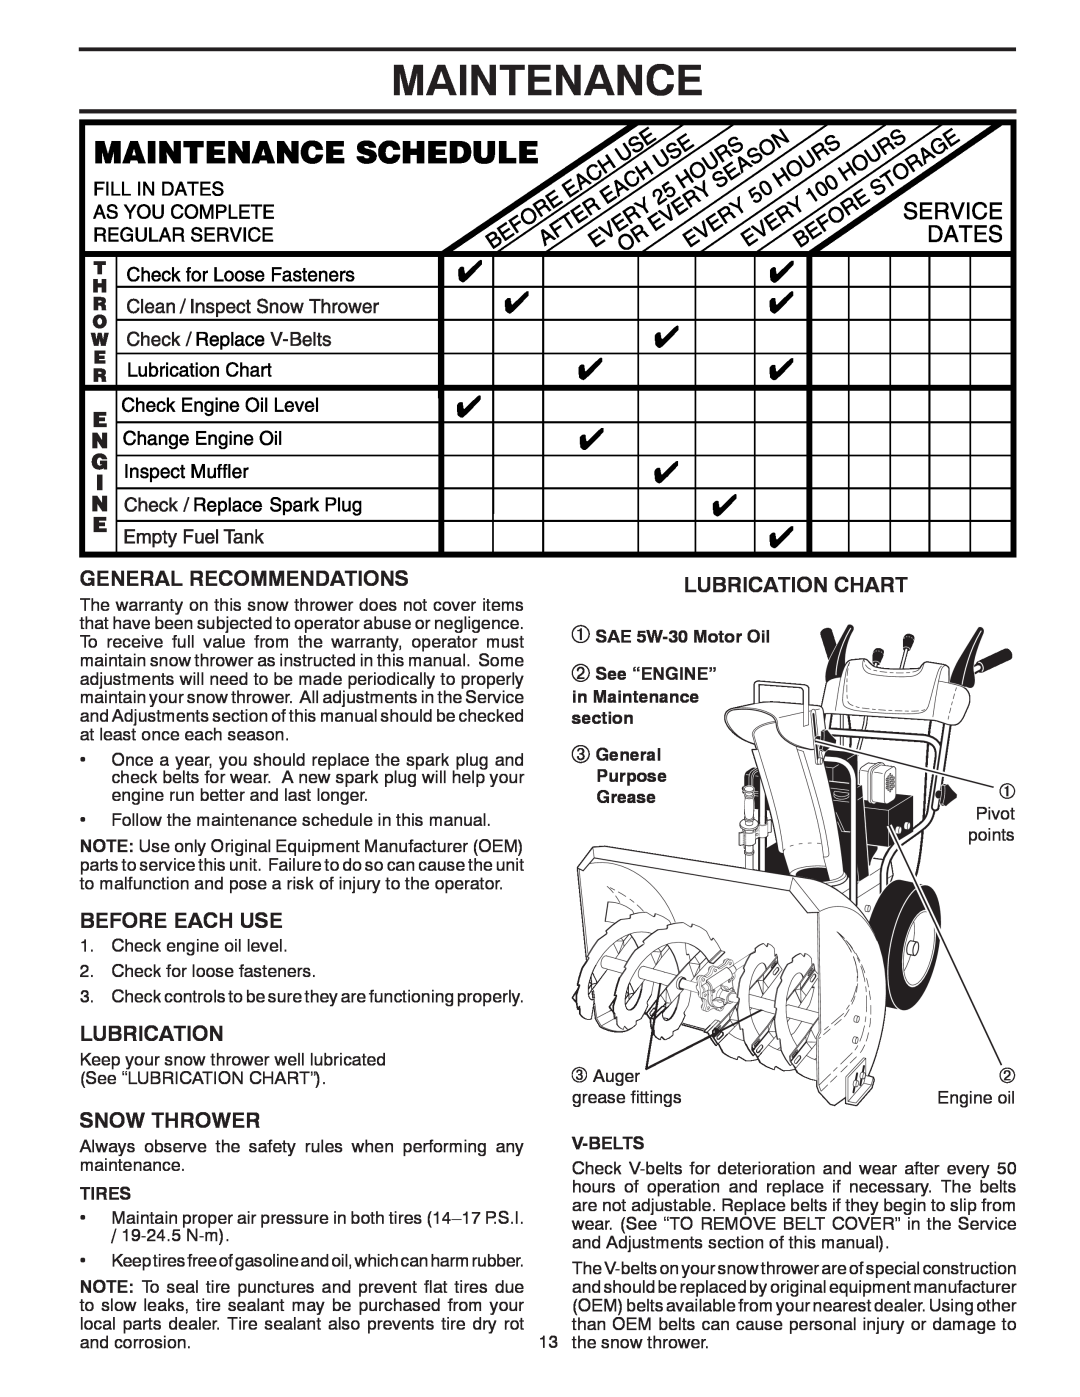 Poulan 96192001801 Maintenance, General Recommendations, Before Each Use, Snow Thrower, Lubrication Chart, Tires 